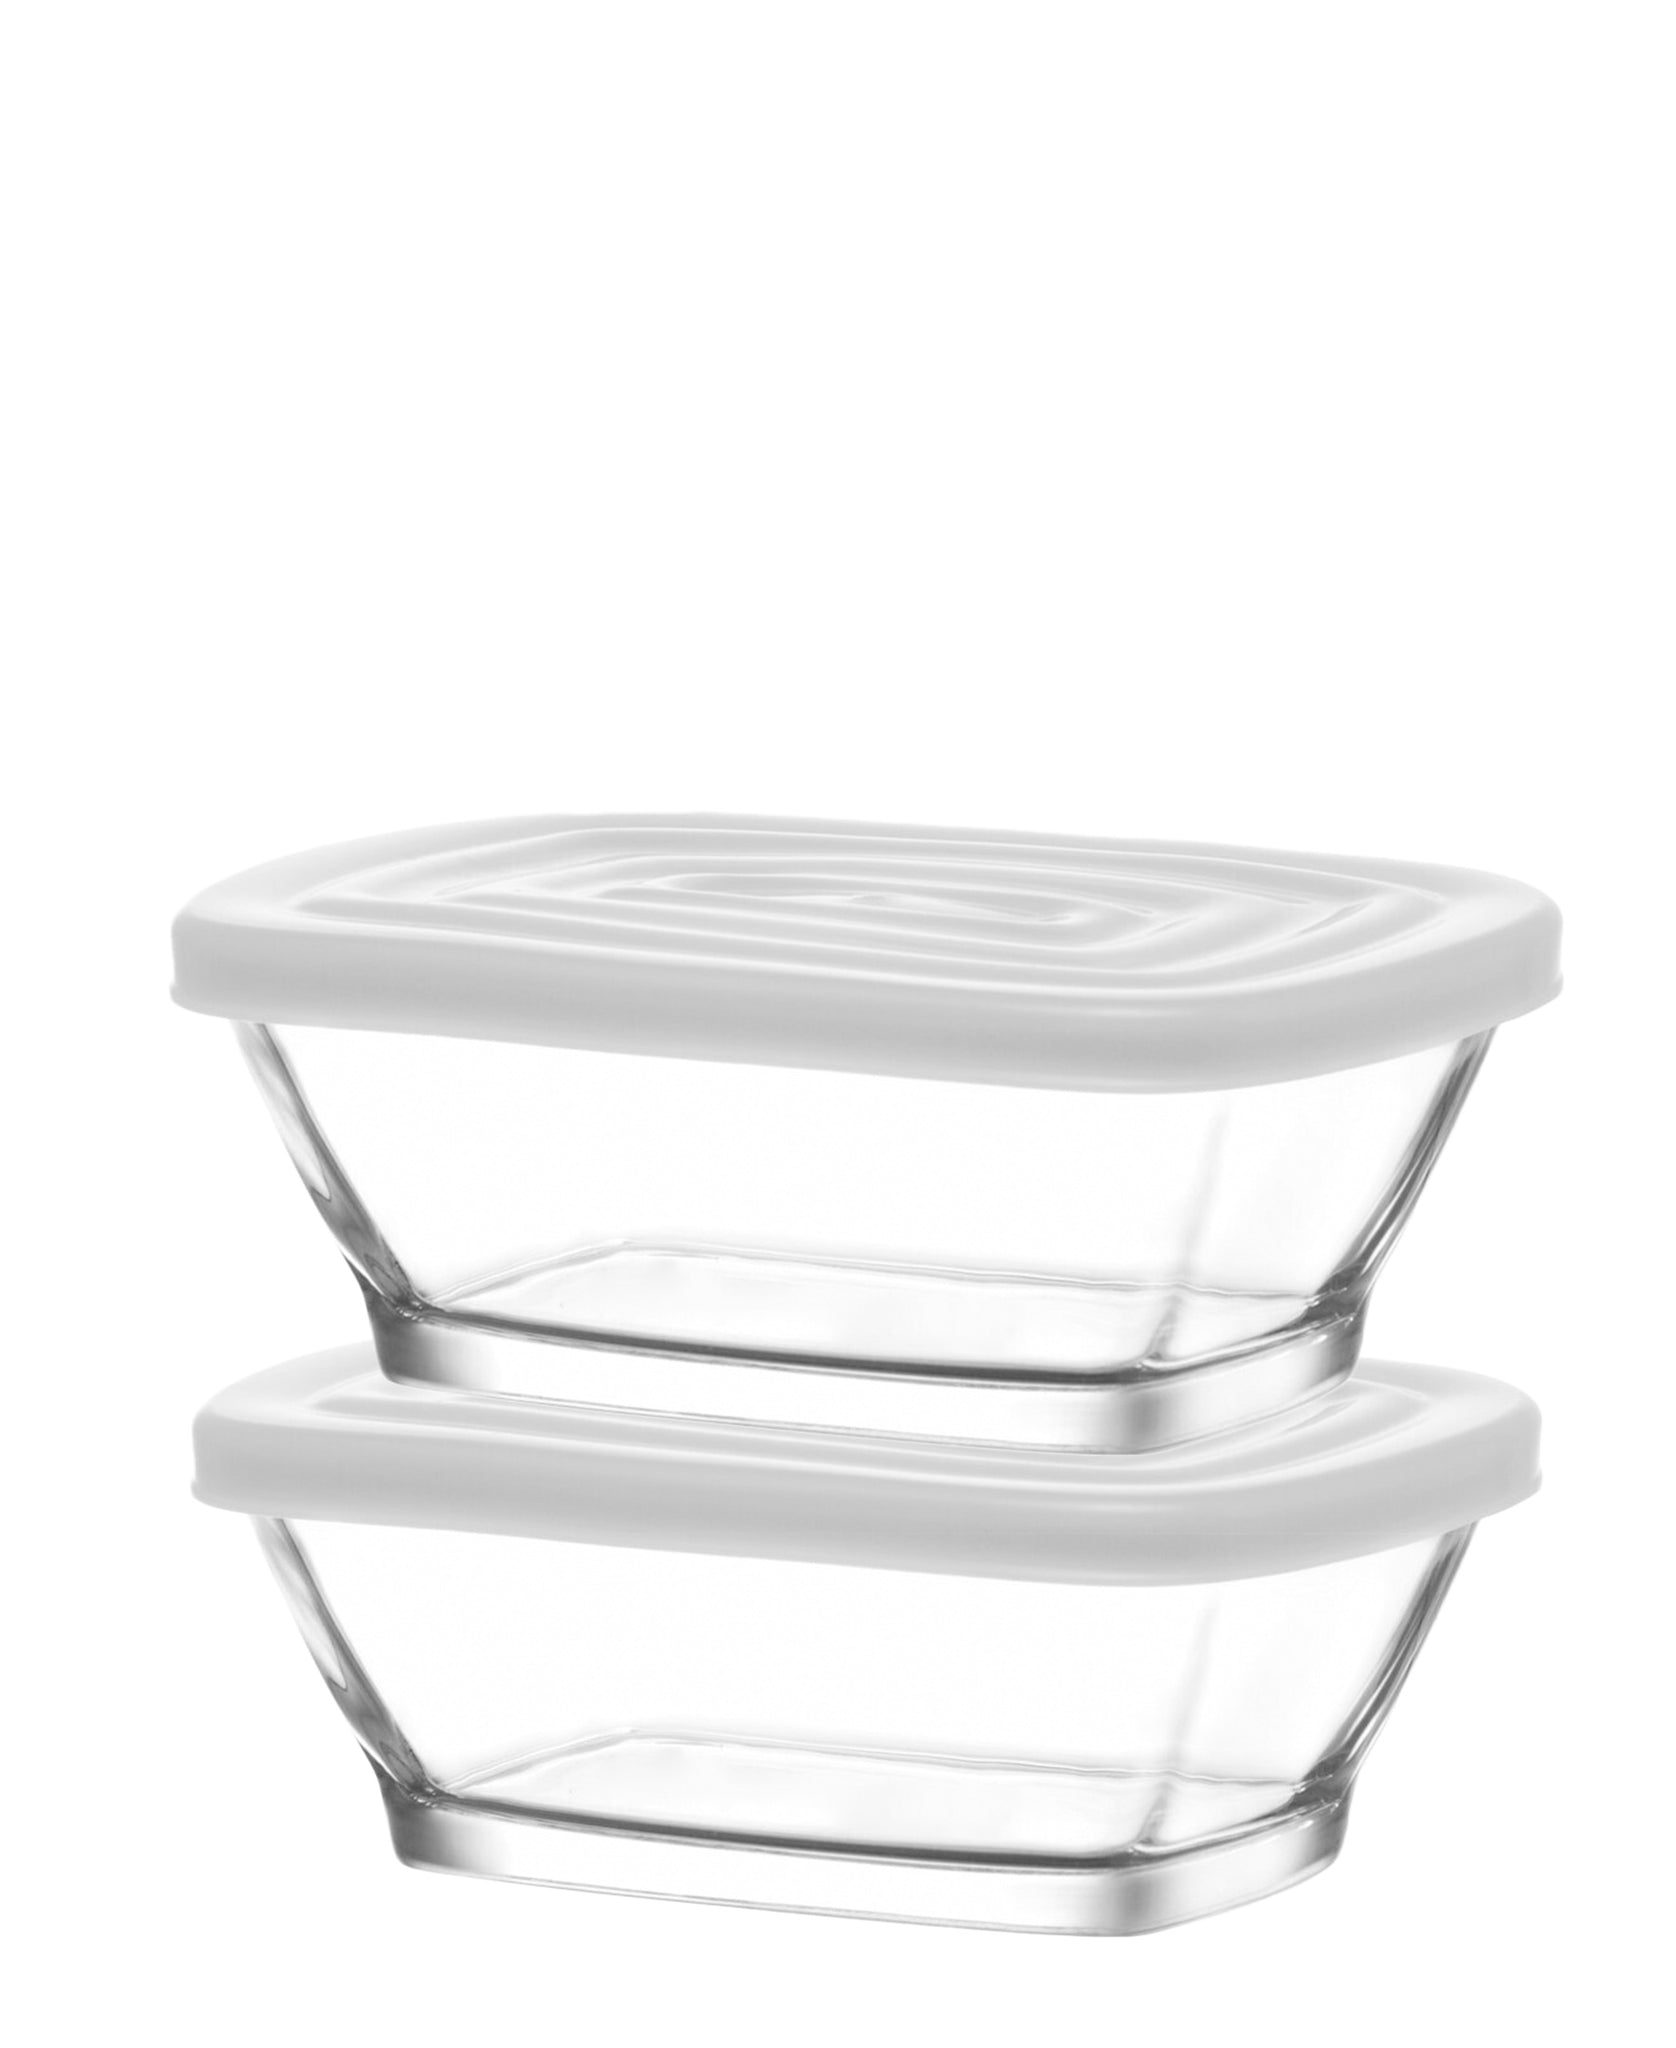 LAV 2 Piece Defne Containers - DEF247